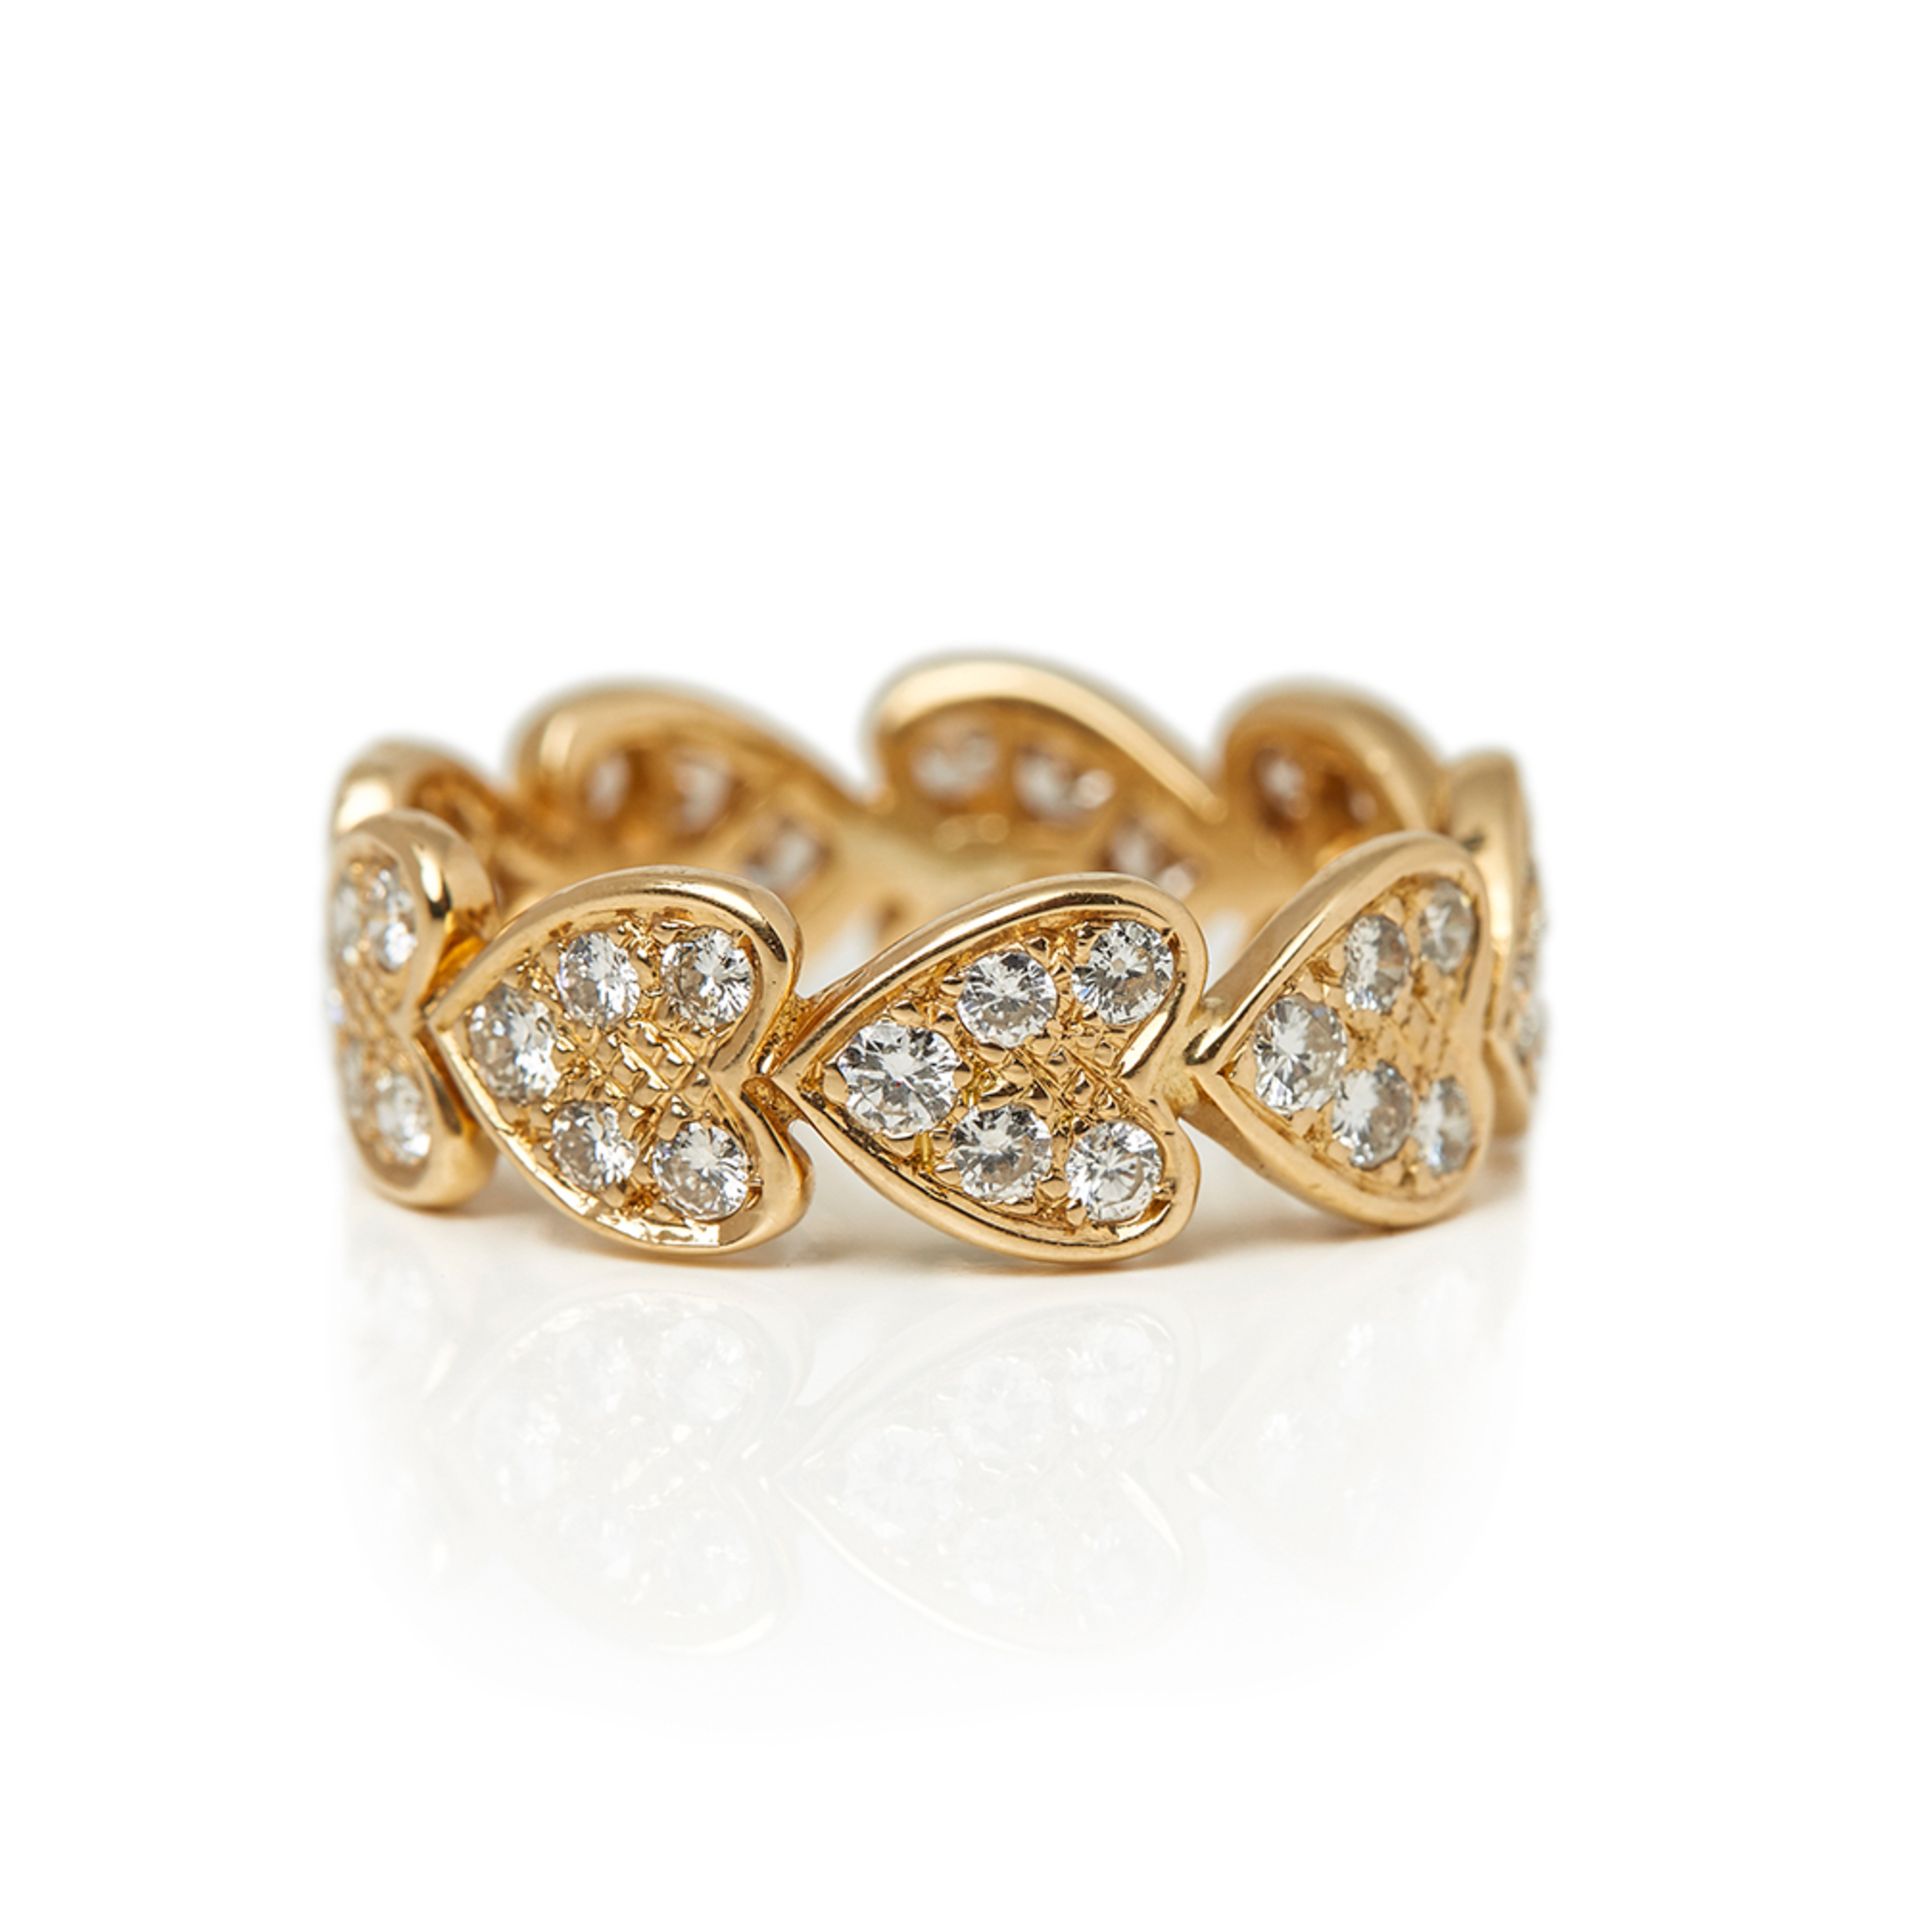 Cartier 18k Yellow Gold Diamond Heart Ring - Image 5 of 9